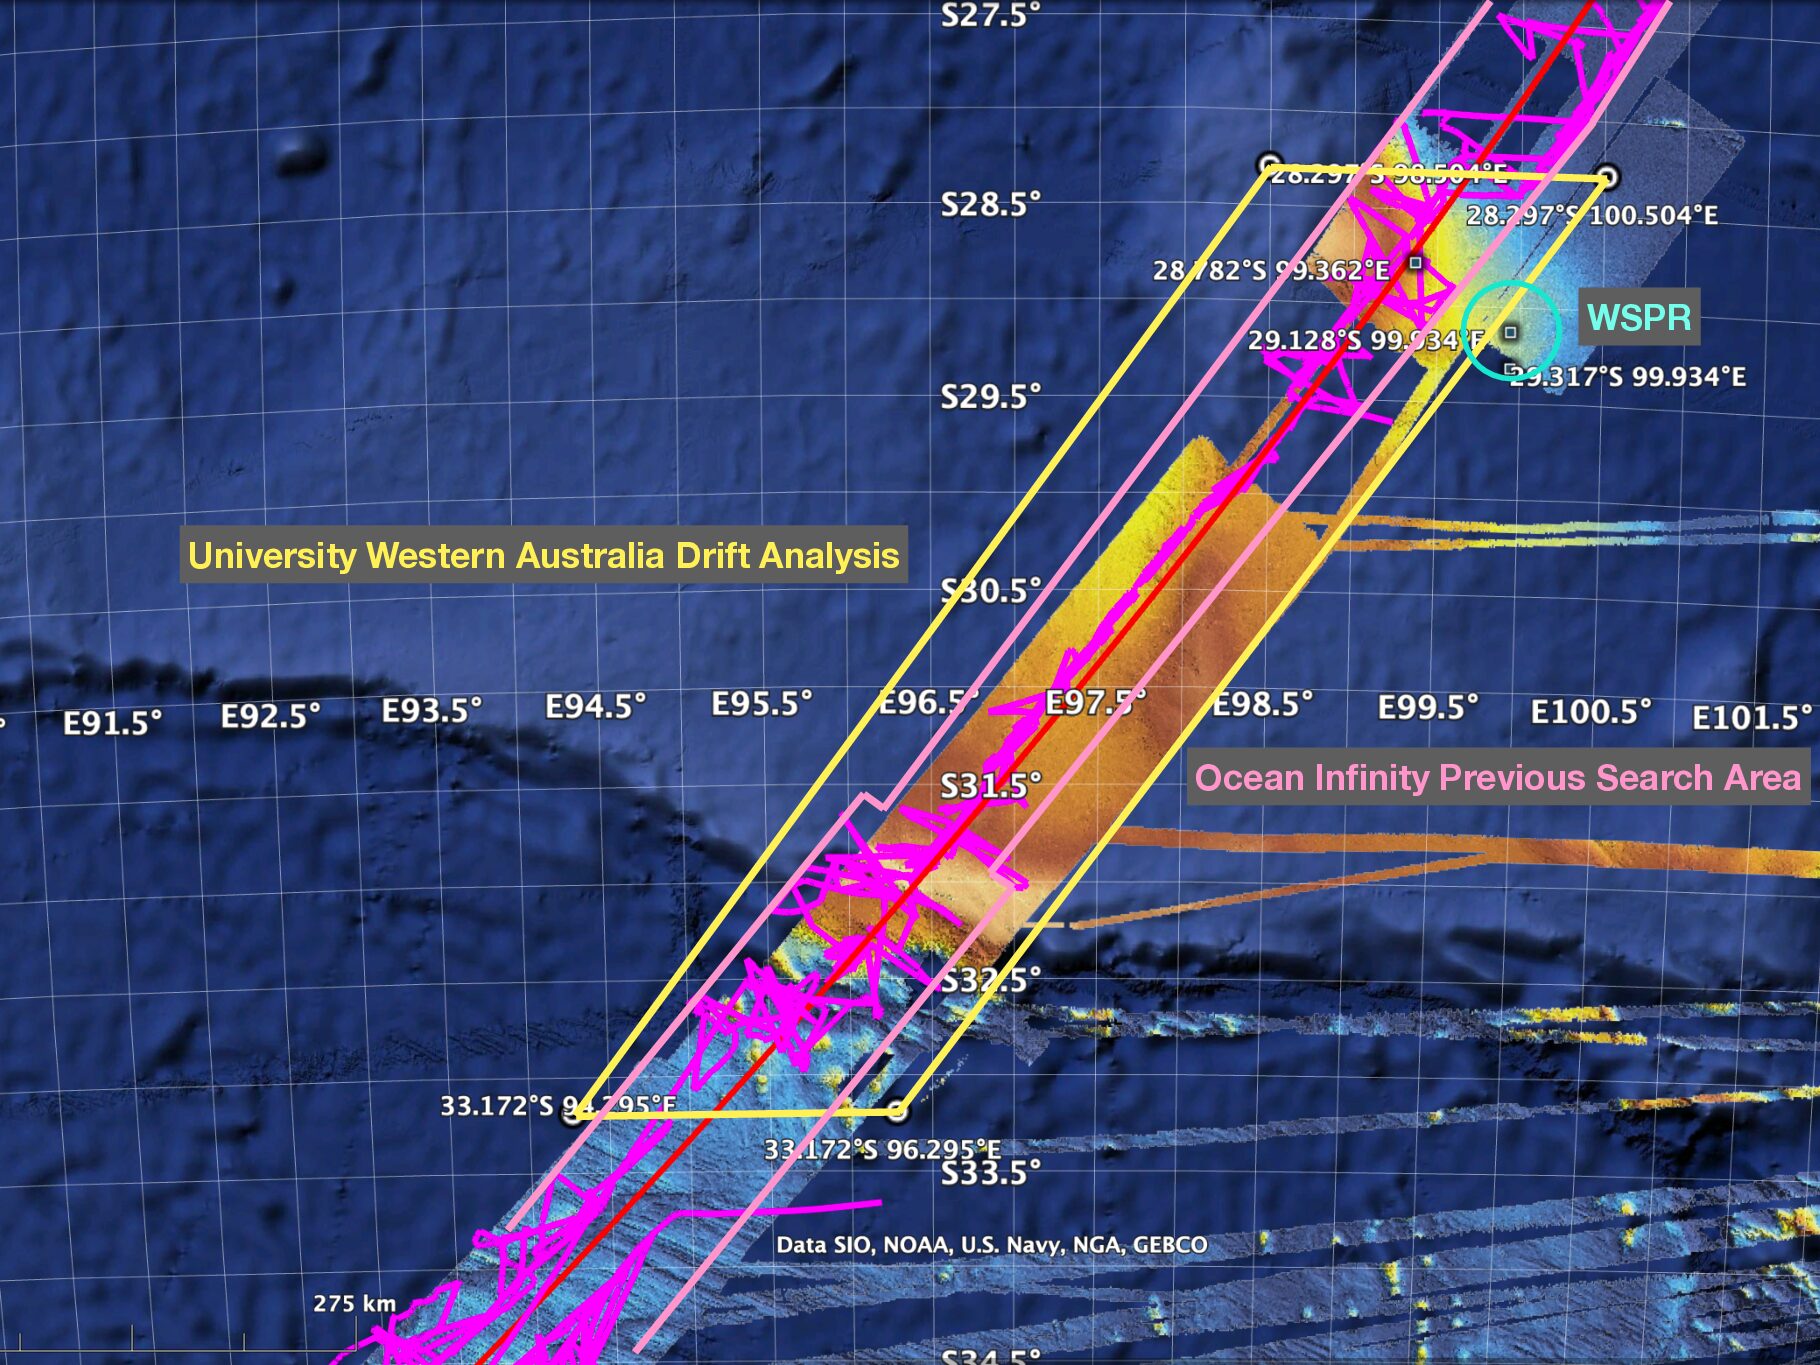 MH370 Search Area (Updated)